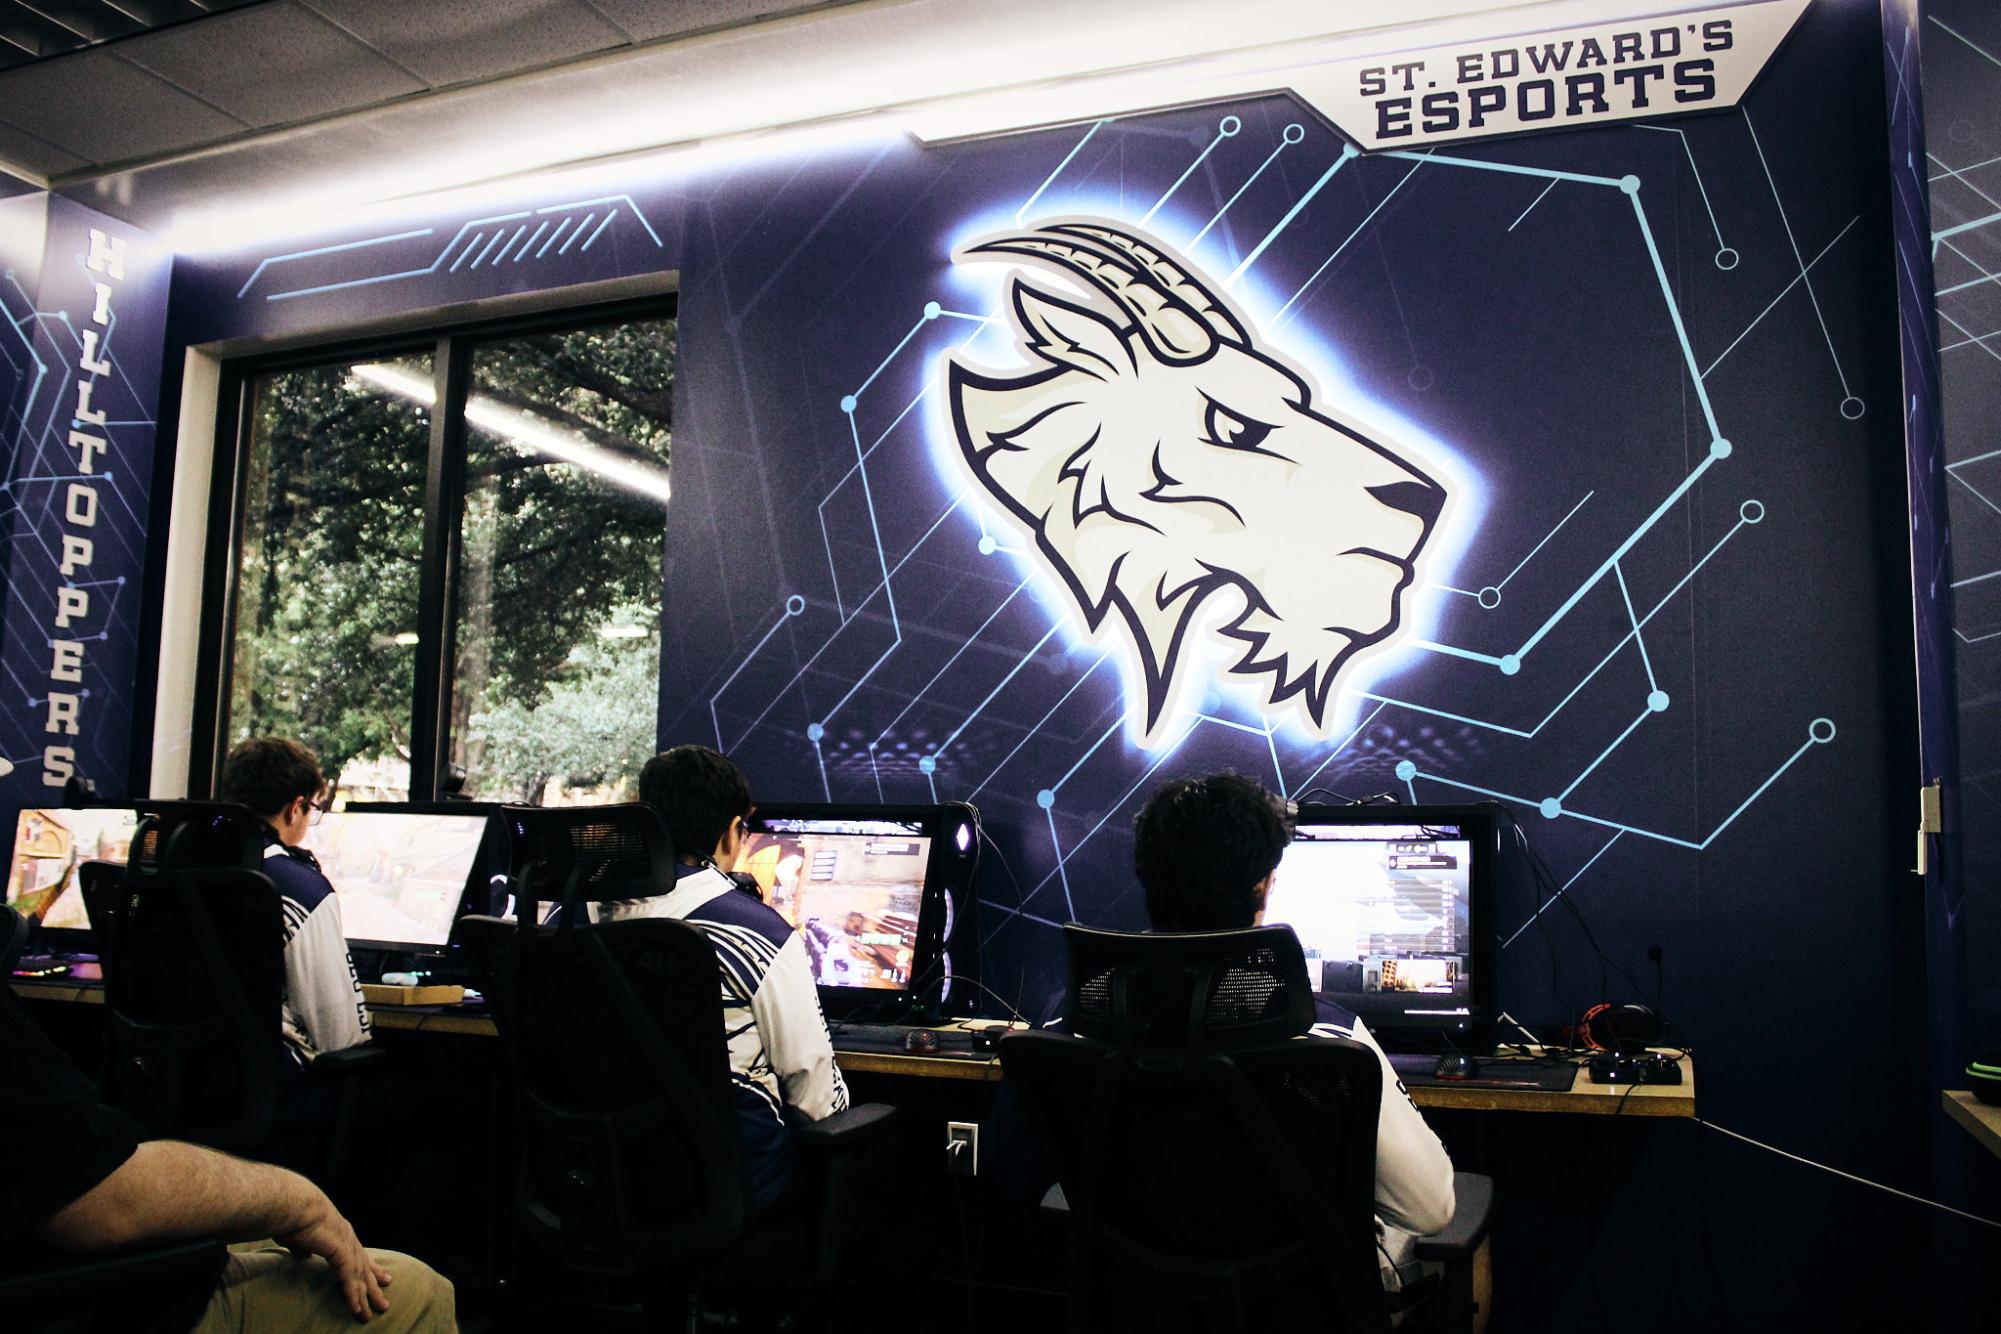 The esports team set up shop in their second room on campus where they played three matches against Oklahoma Christian University.